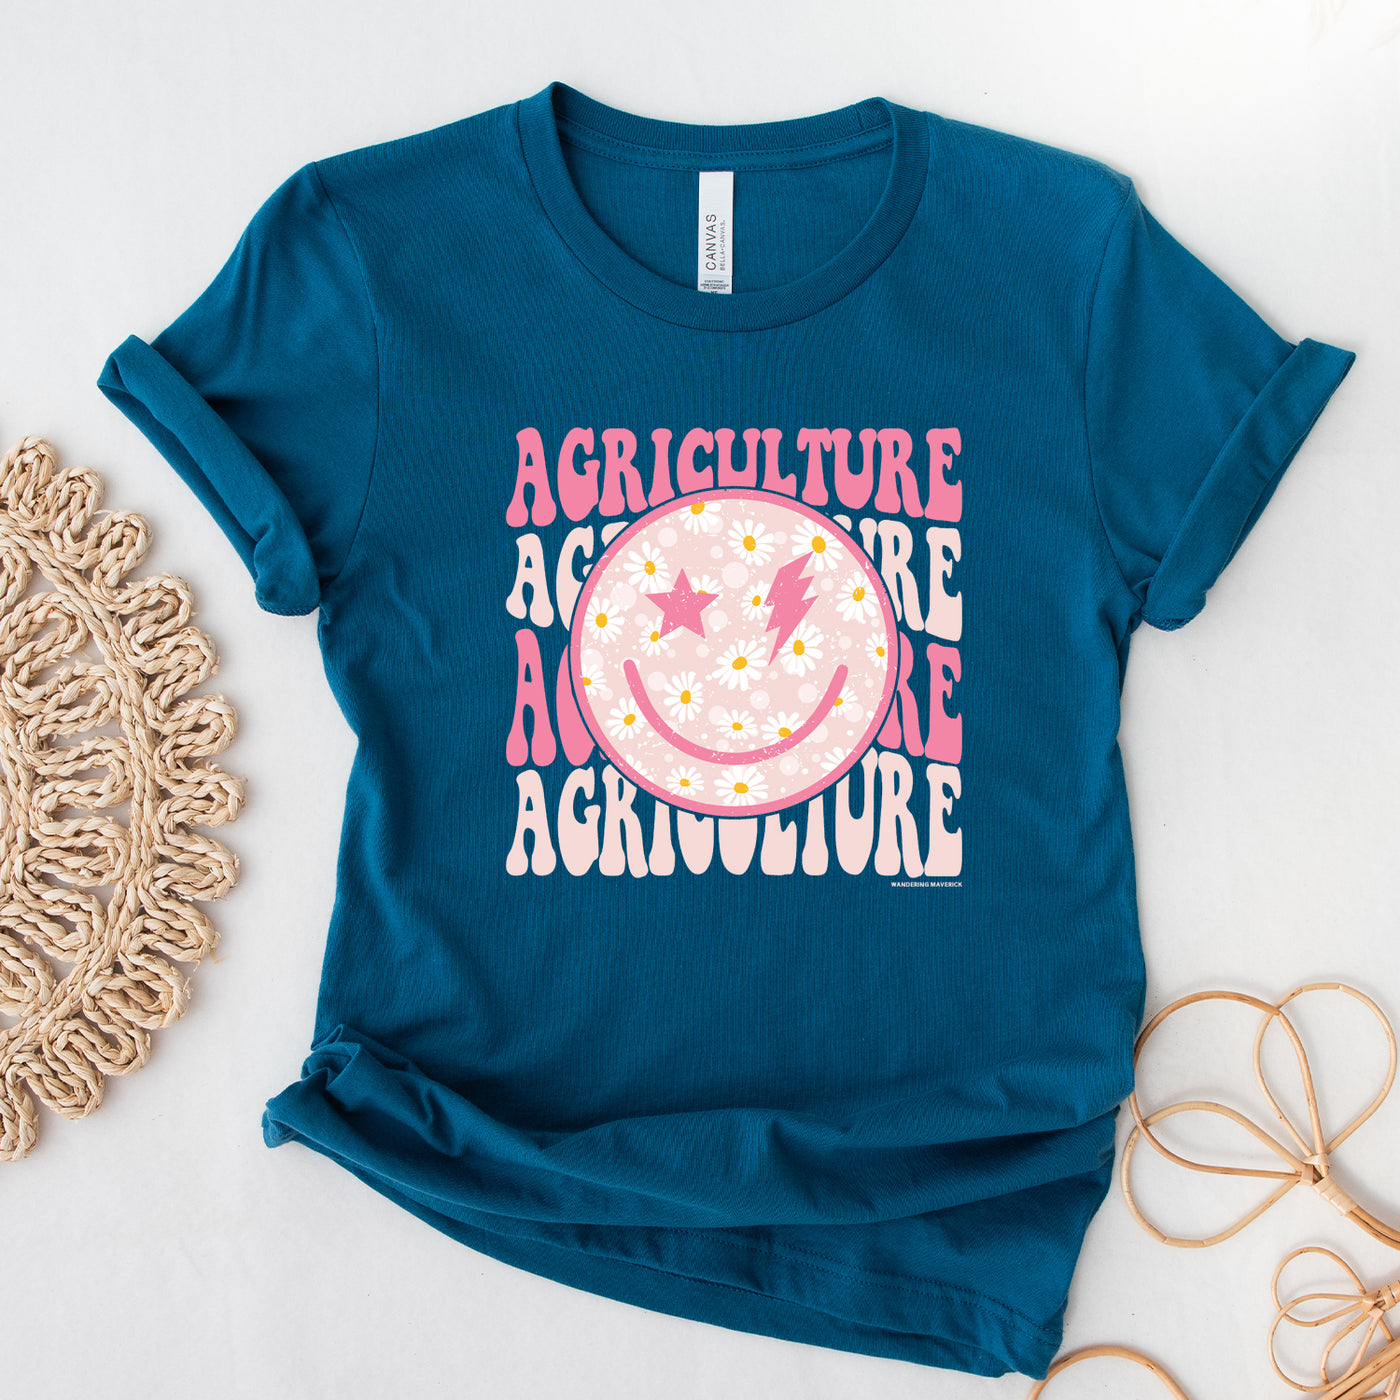 Groovy Daisy Agriculture T-Shirt (XS-4XL) - Multiple Colors!